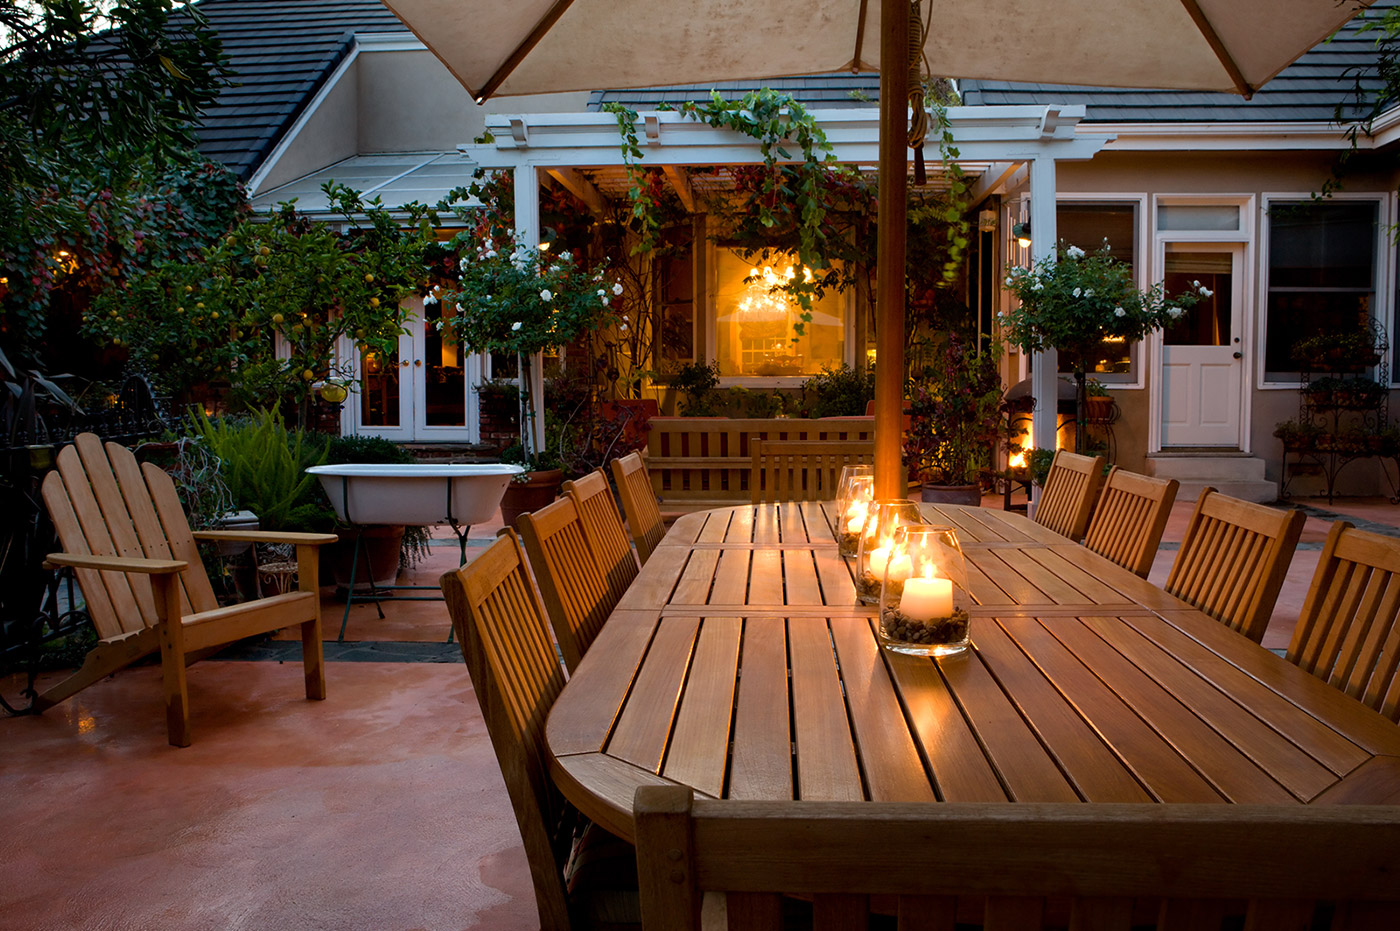 An outdoor patio with a large, wooden dining table under an umbrella.